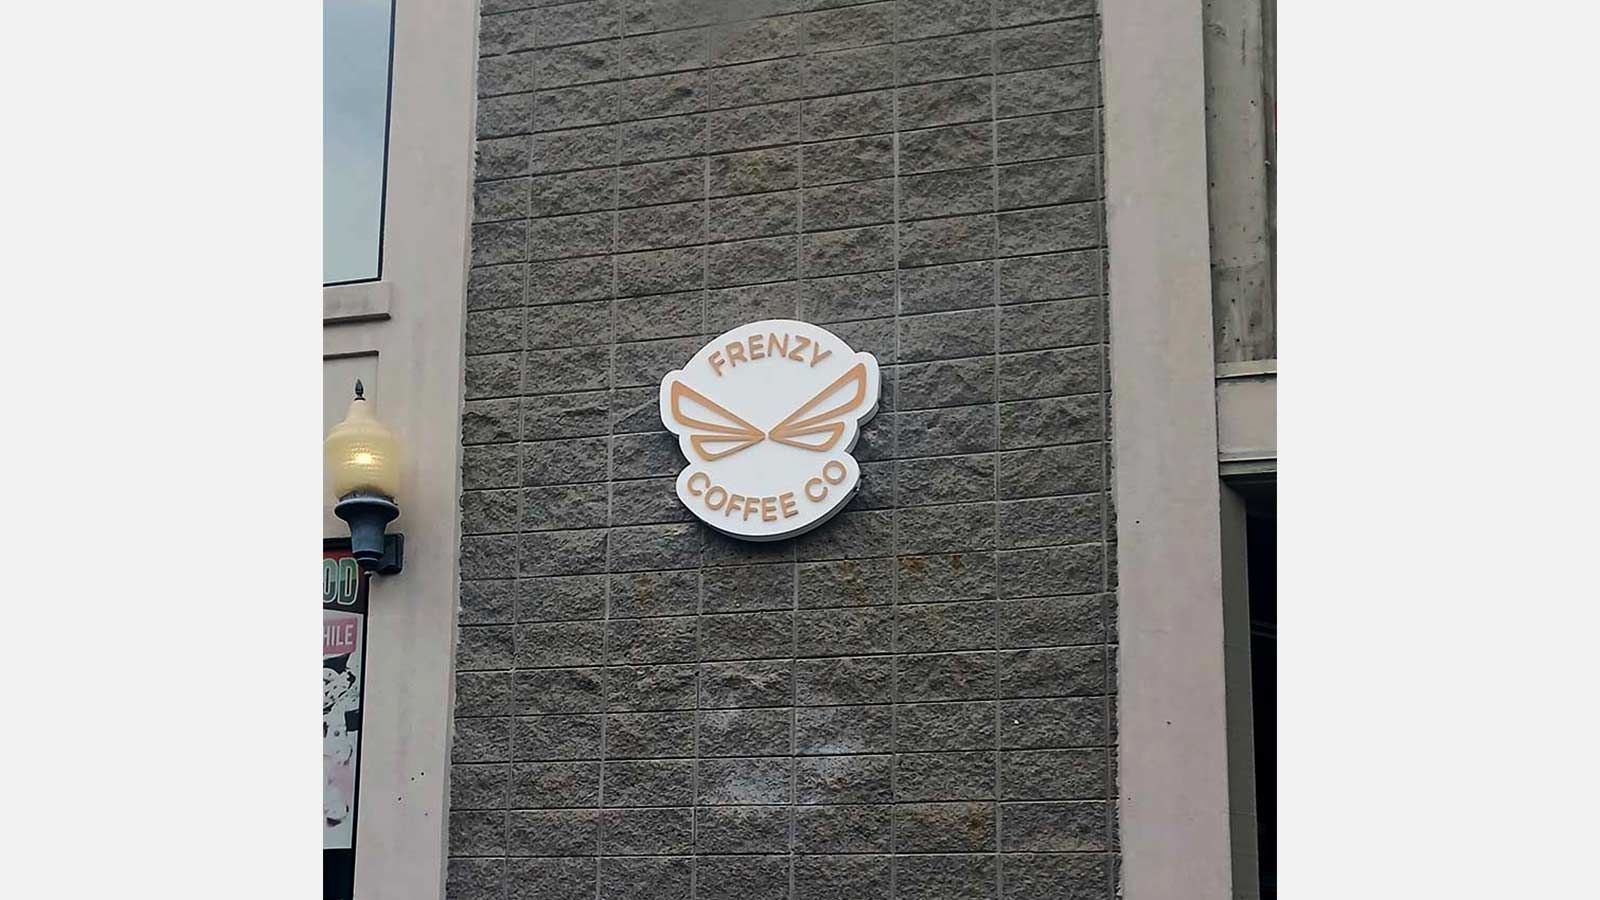 Frenzy Coffee Company push through sign on the wall